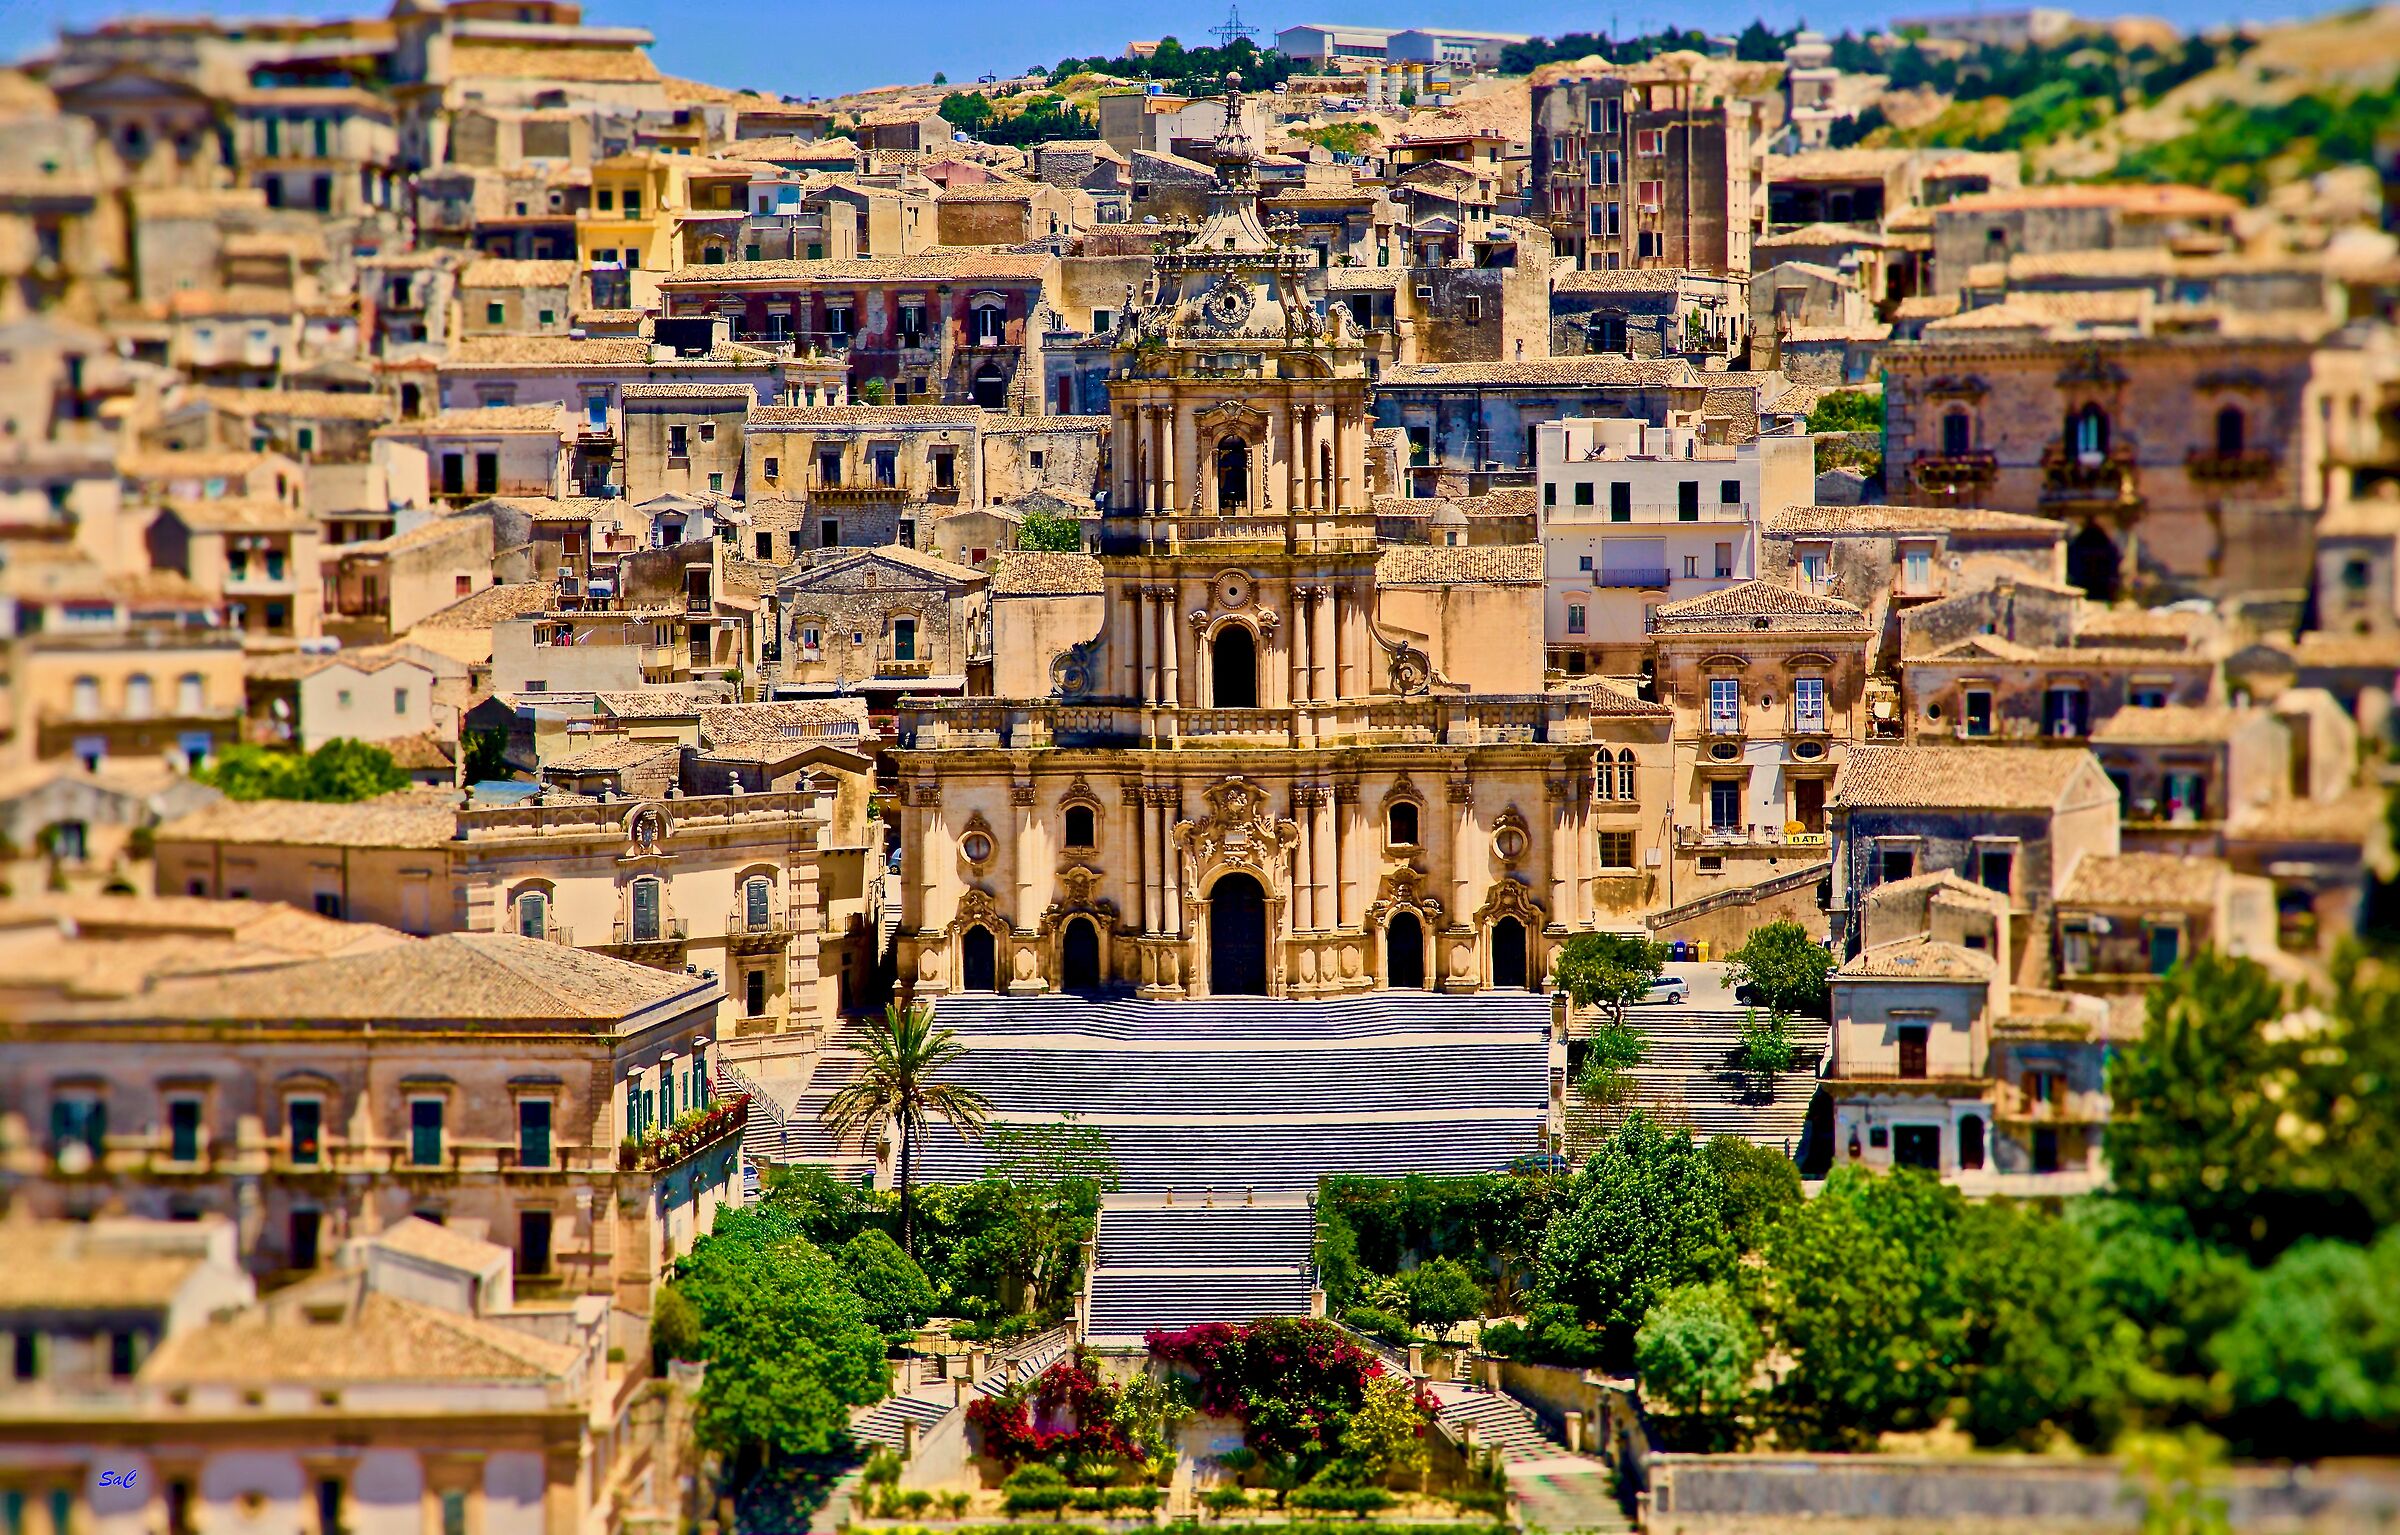 St. George's Cathedral. Modica...